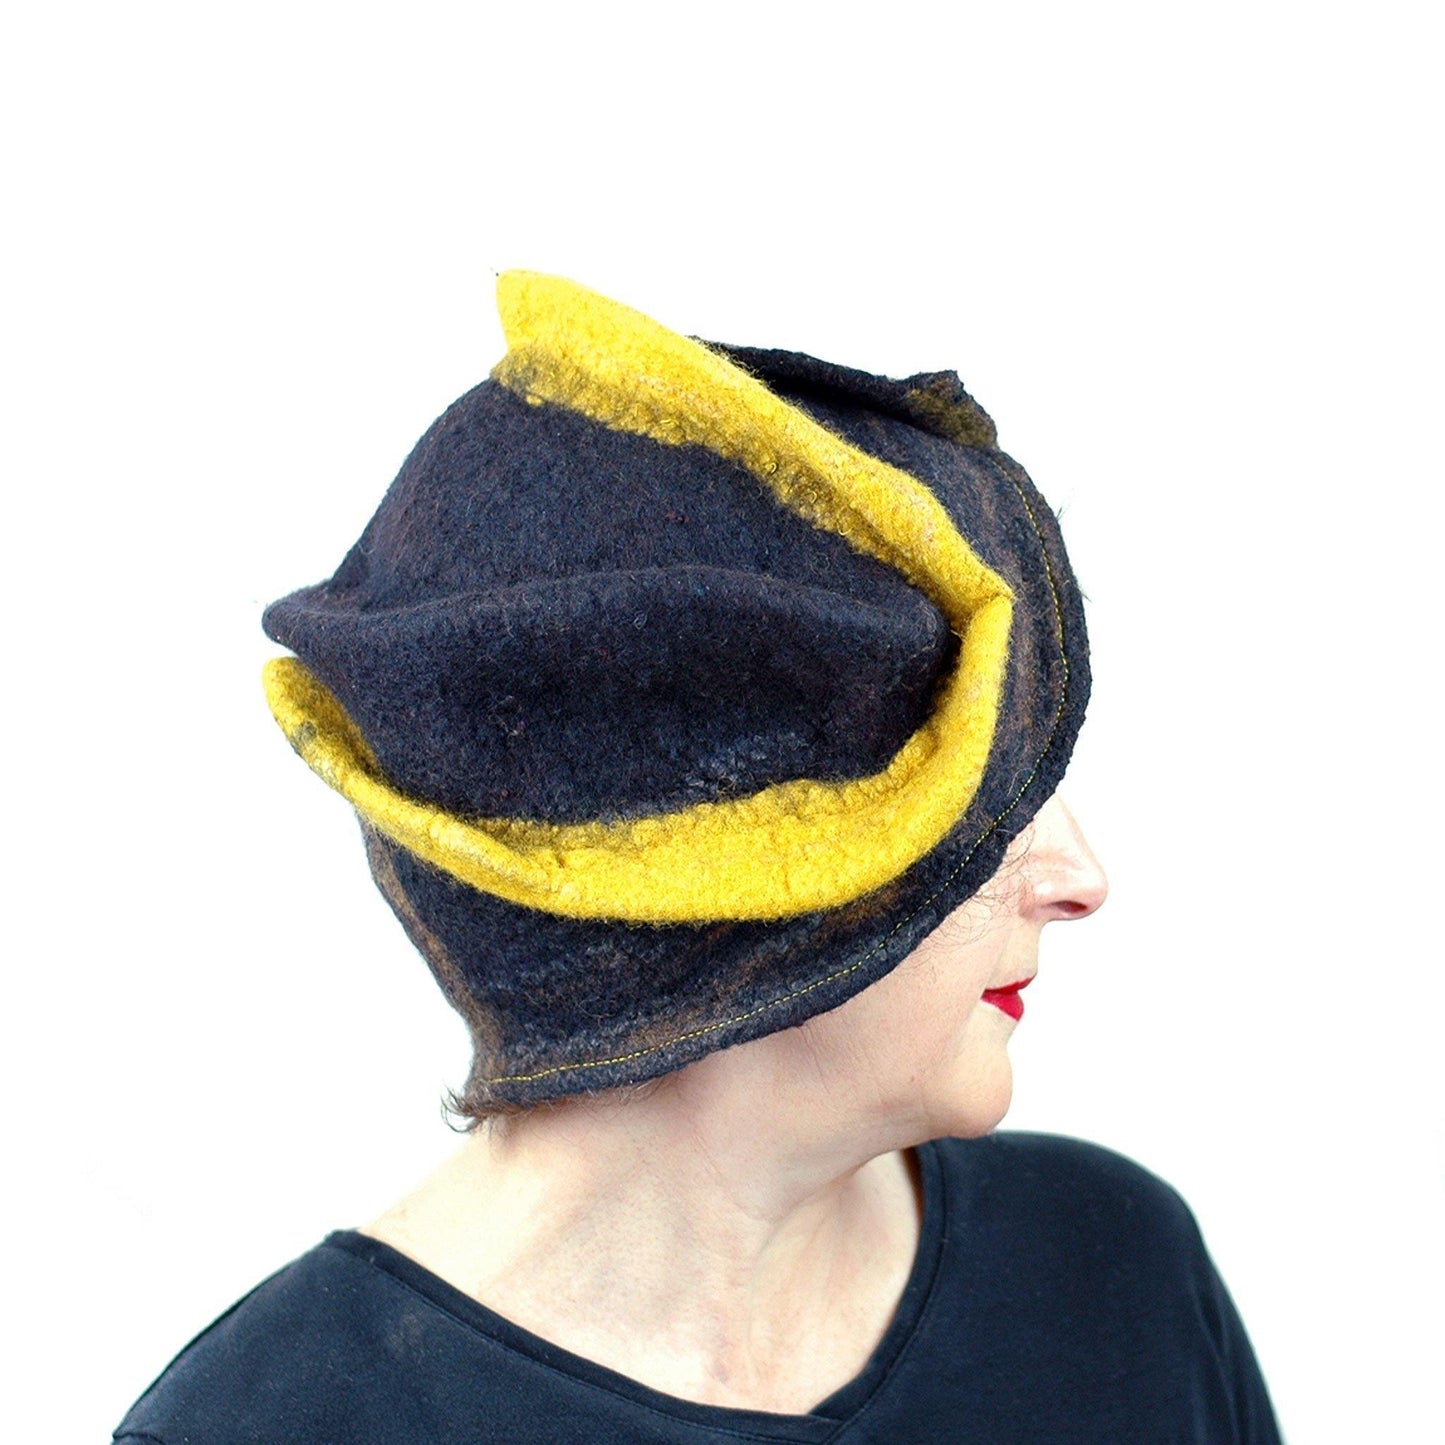 Black and Gold Wizard Hat for Pittsburgh or Hufflepuff Fans - side view